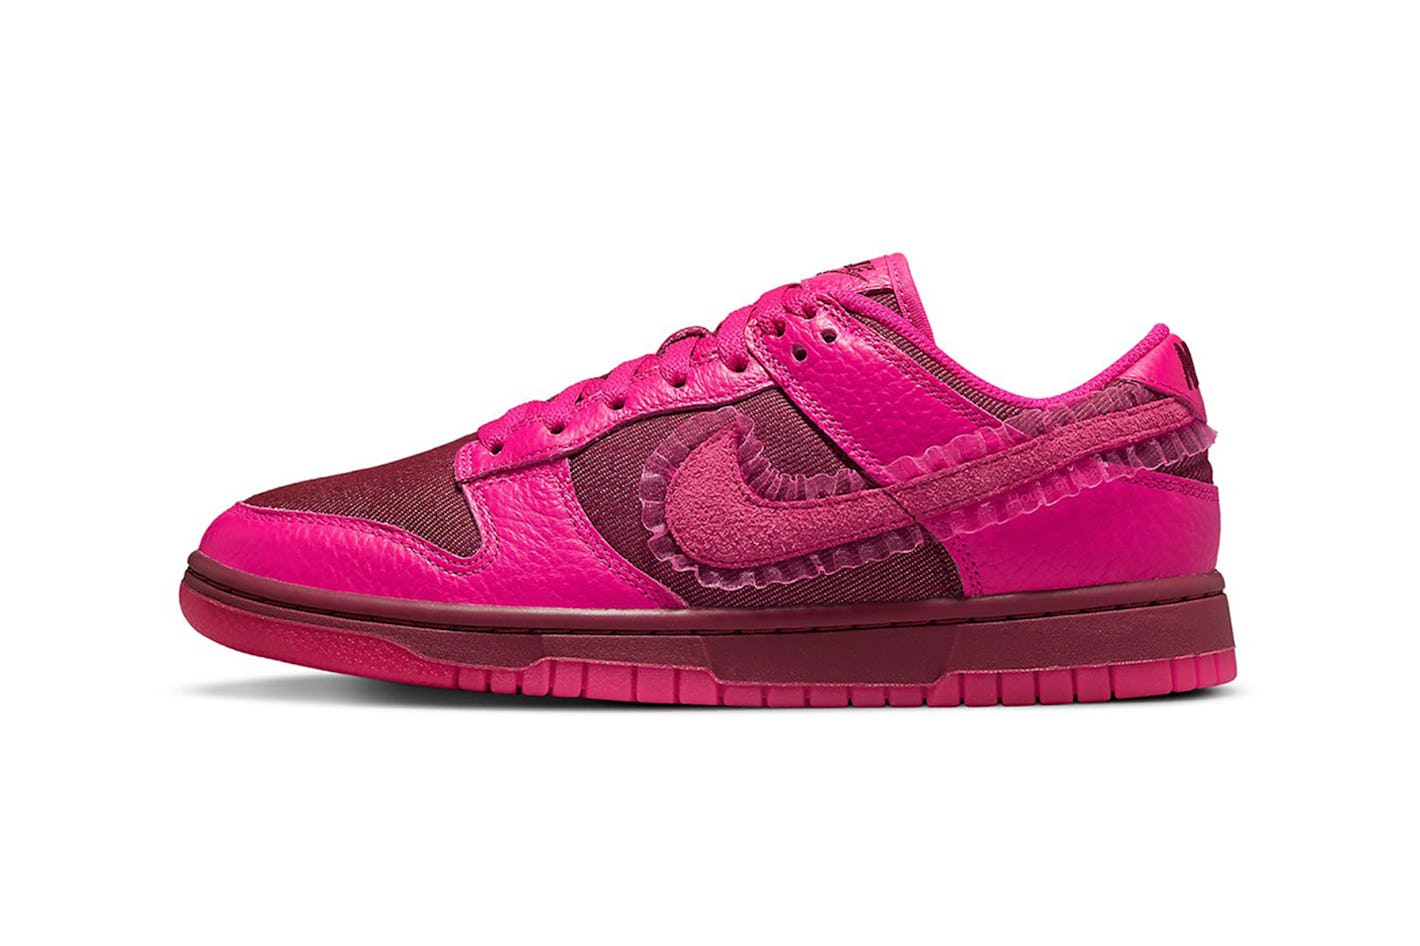 nike-has-a-bright-pink-dunk-sneaker-ready-for-valentine-s-day